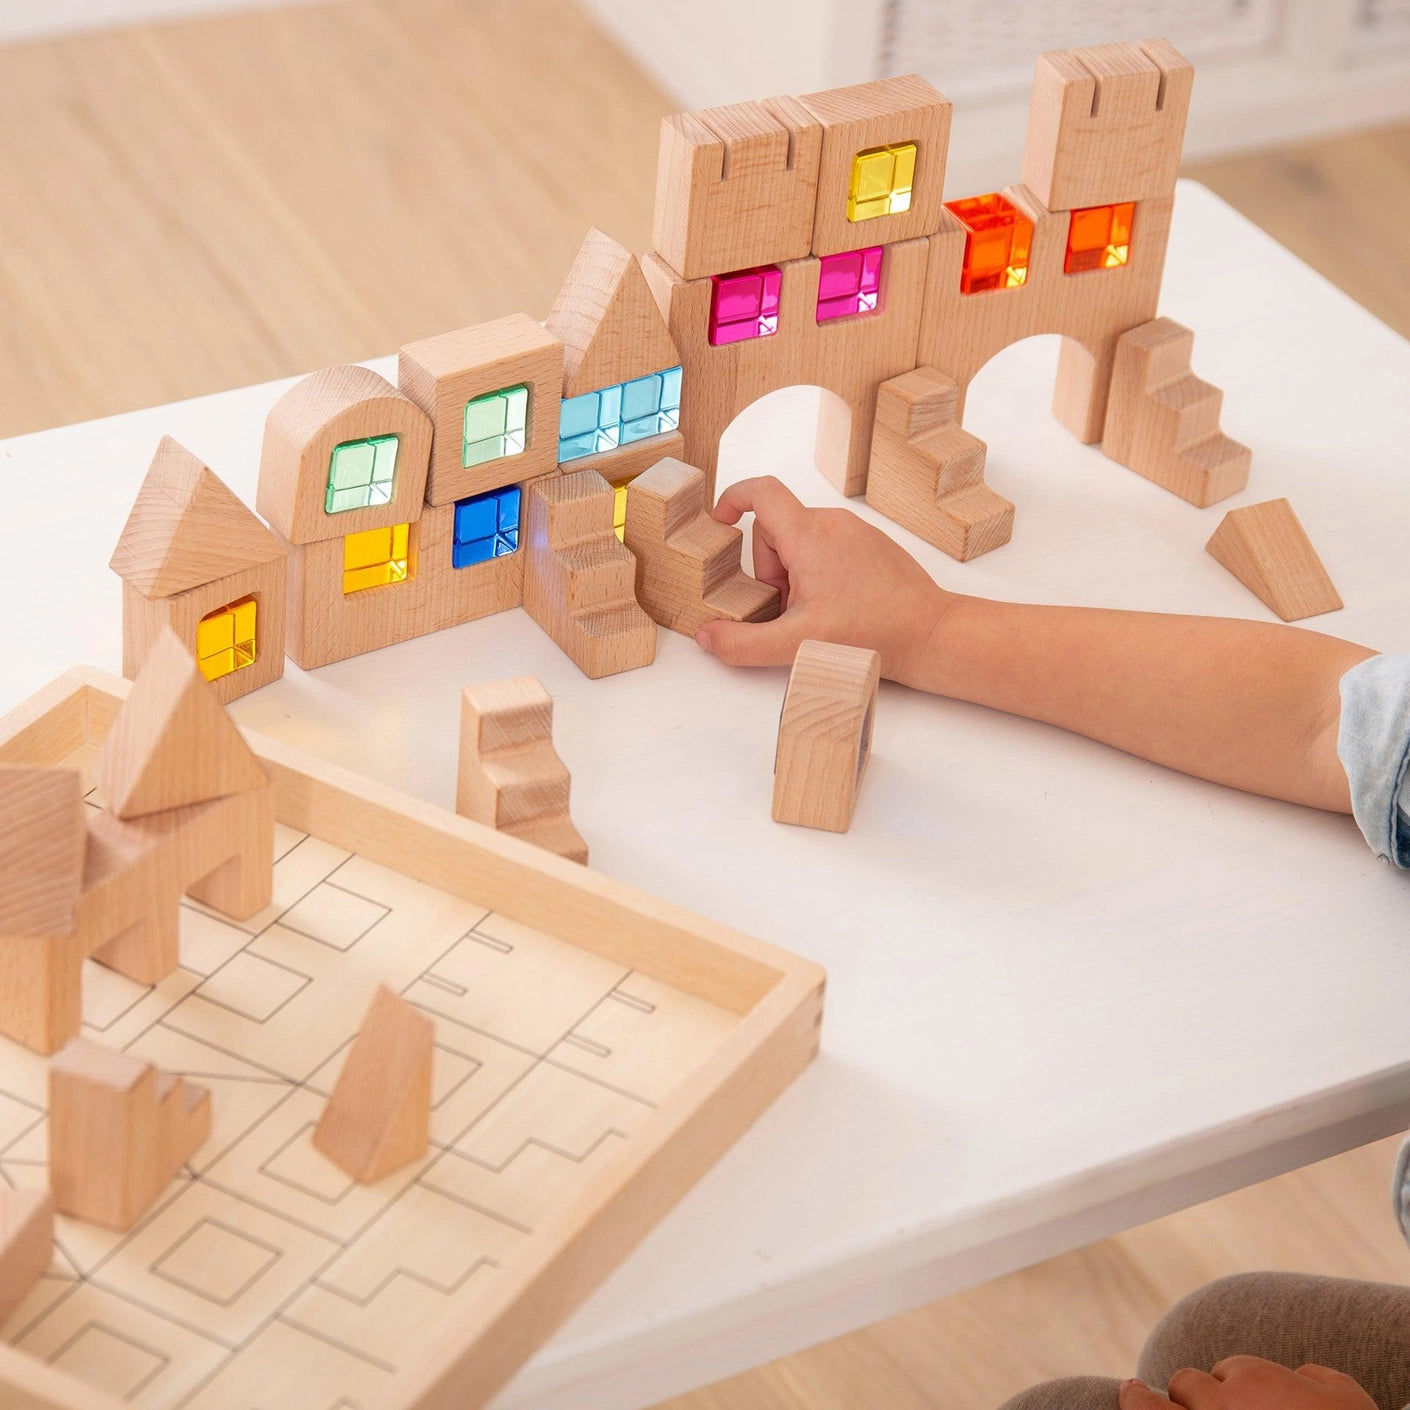 Wooden building blocks with colored cubes, 40 pieces